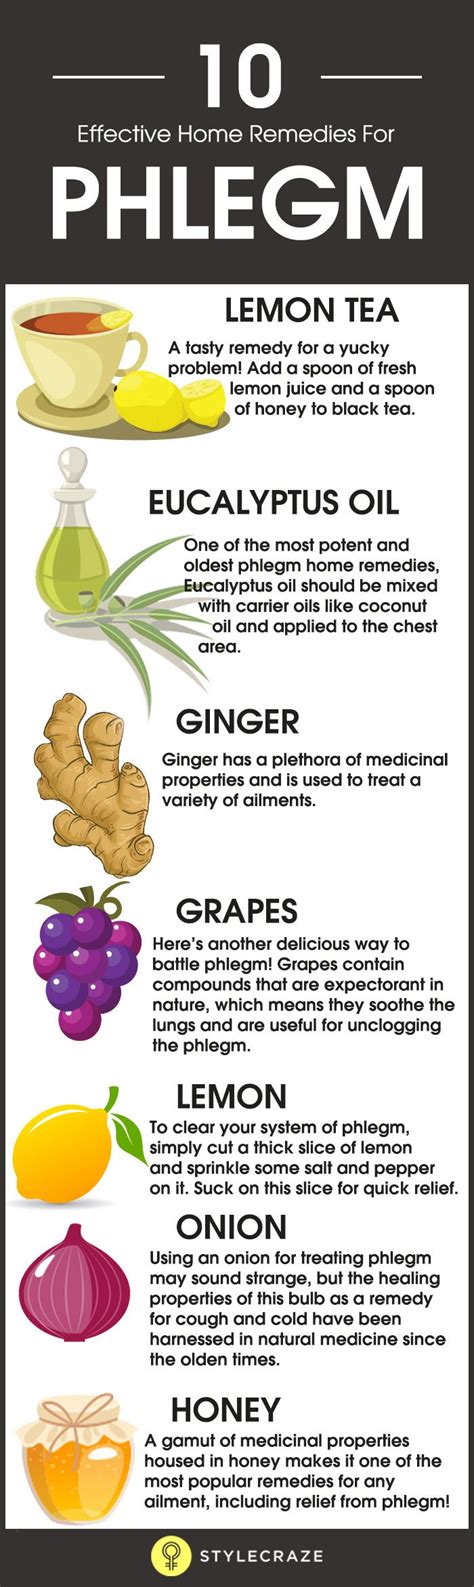 Getting Rid Of Phlegm The Most Effective Home Remedies Infographic